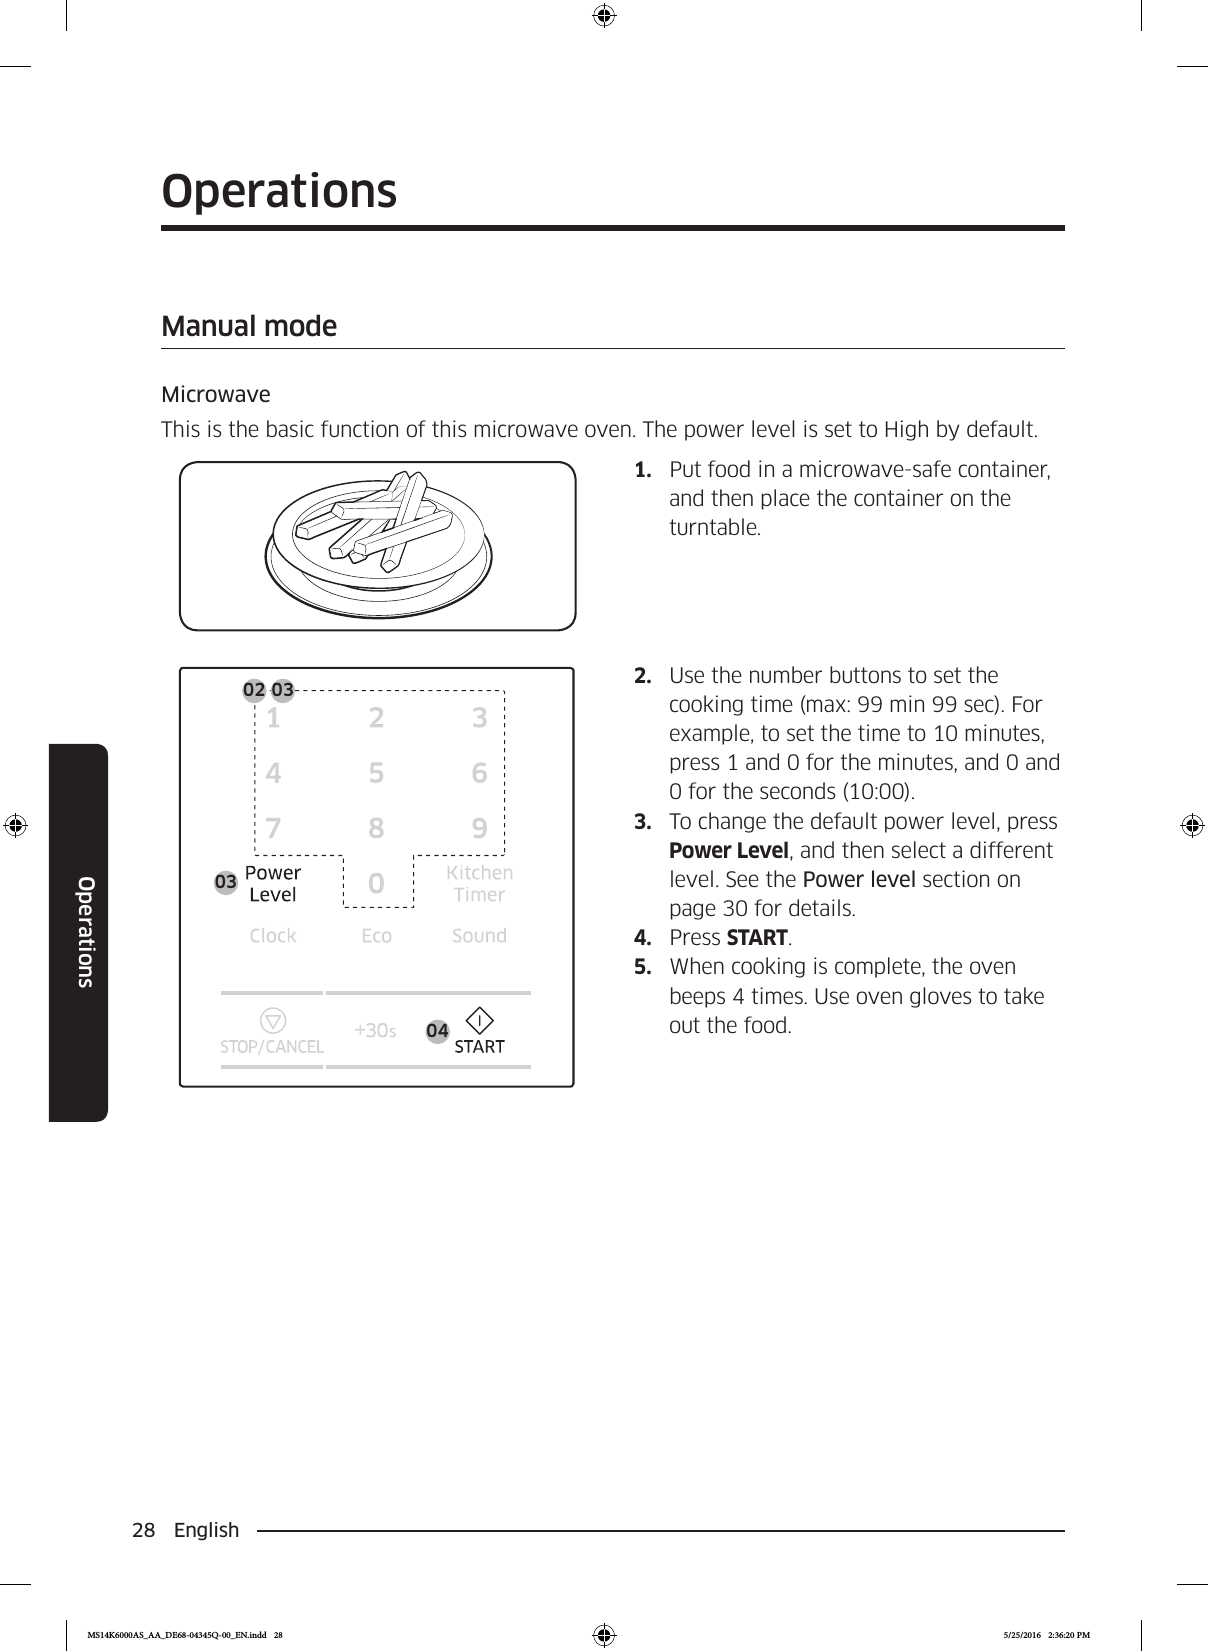 28 EnglishOperationsOperationsManual modeMicrowaveThis is the basic function of this microwave oven. The power level is set to High by default.1.  Put food in a microwave-safe container, and then place the container on the turntable.0402 03032.  Use the number buttons to set the cooking time (max: 99 min 99 sec). For example, to set the time to 10 minutes, press 1 and 0 for the minutes, and 0 and 0 for the seconds (10:00).3.  To change the default power level, press Power Level, and then select a different level. See the Power level section on page 30 for details.4.  Press START.5.  When cooking is complete, the oven beeps 4 times. Use oven gloves to take out the food.MS14K6000AS_AA_DE68-04345Q-00_EN.indd   28 5/25/2016   2:36:20 PM